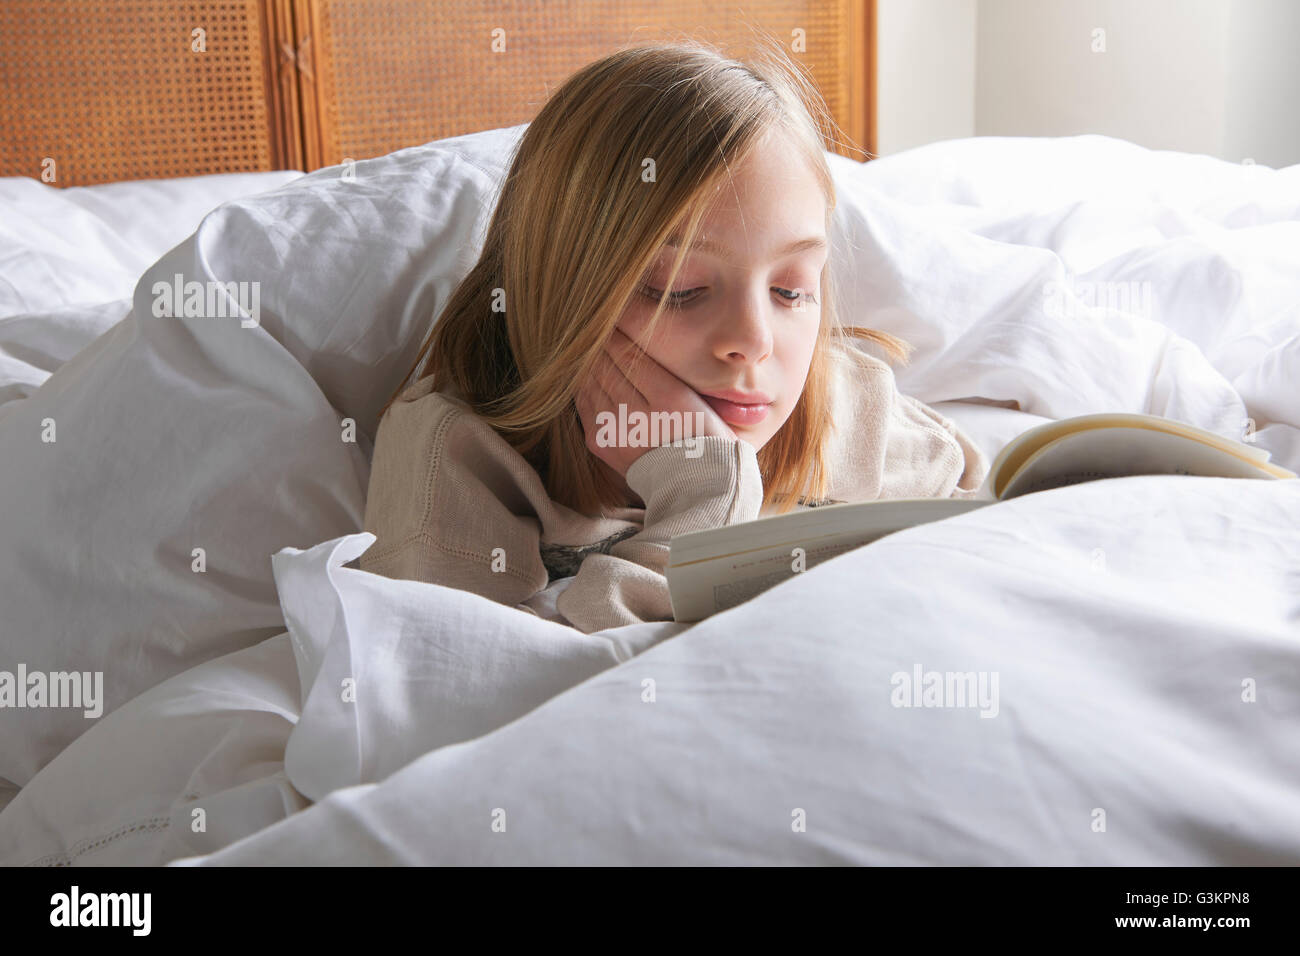 Blond haired girl reading book in bed Stock Photo